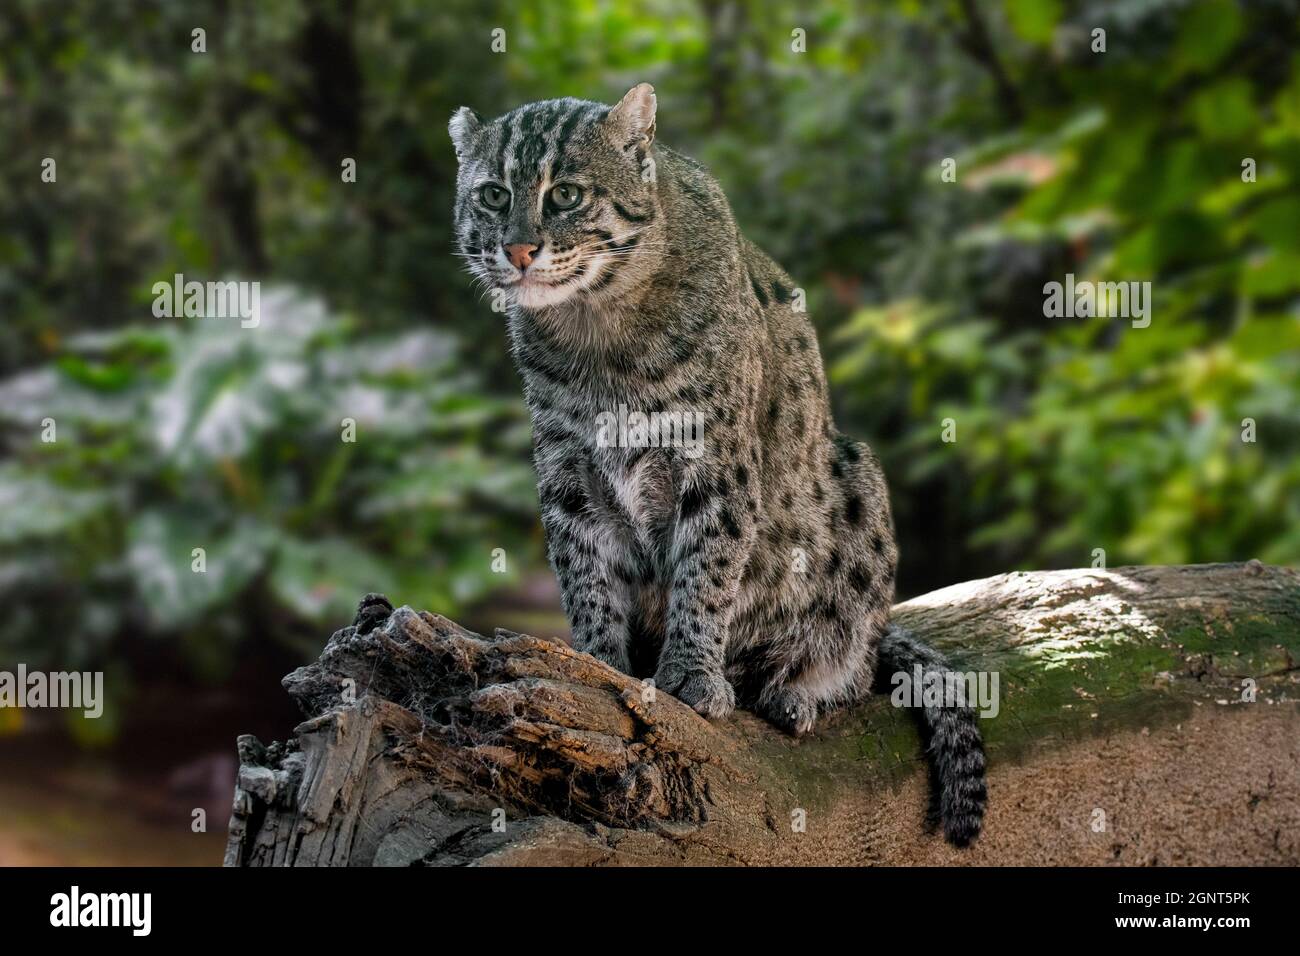 Fishing cat (Prionailurus viverrinus) hunting along river bank, medium-sized wild cat / feline native to South and Southeast Asia Stock Photo